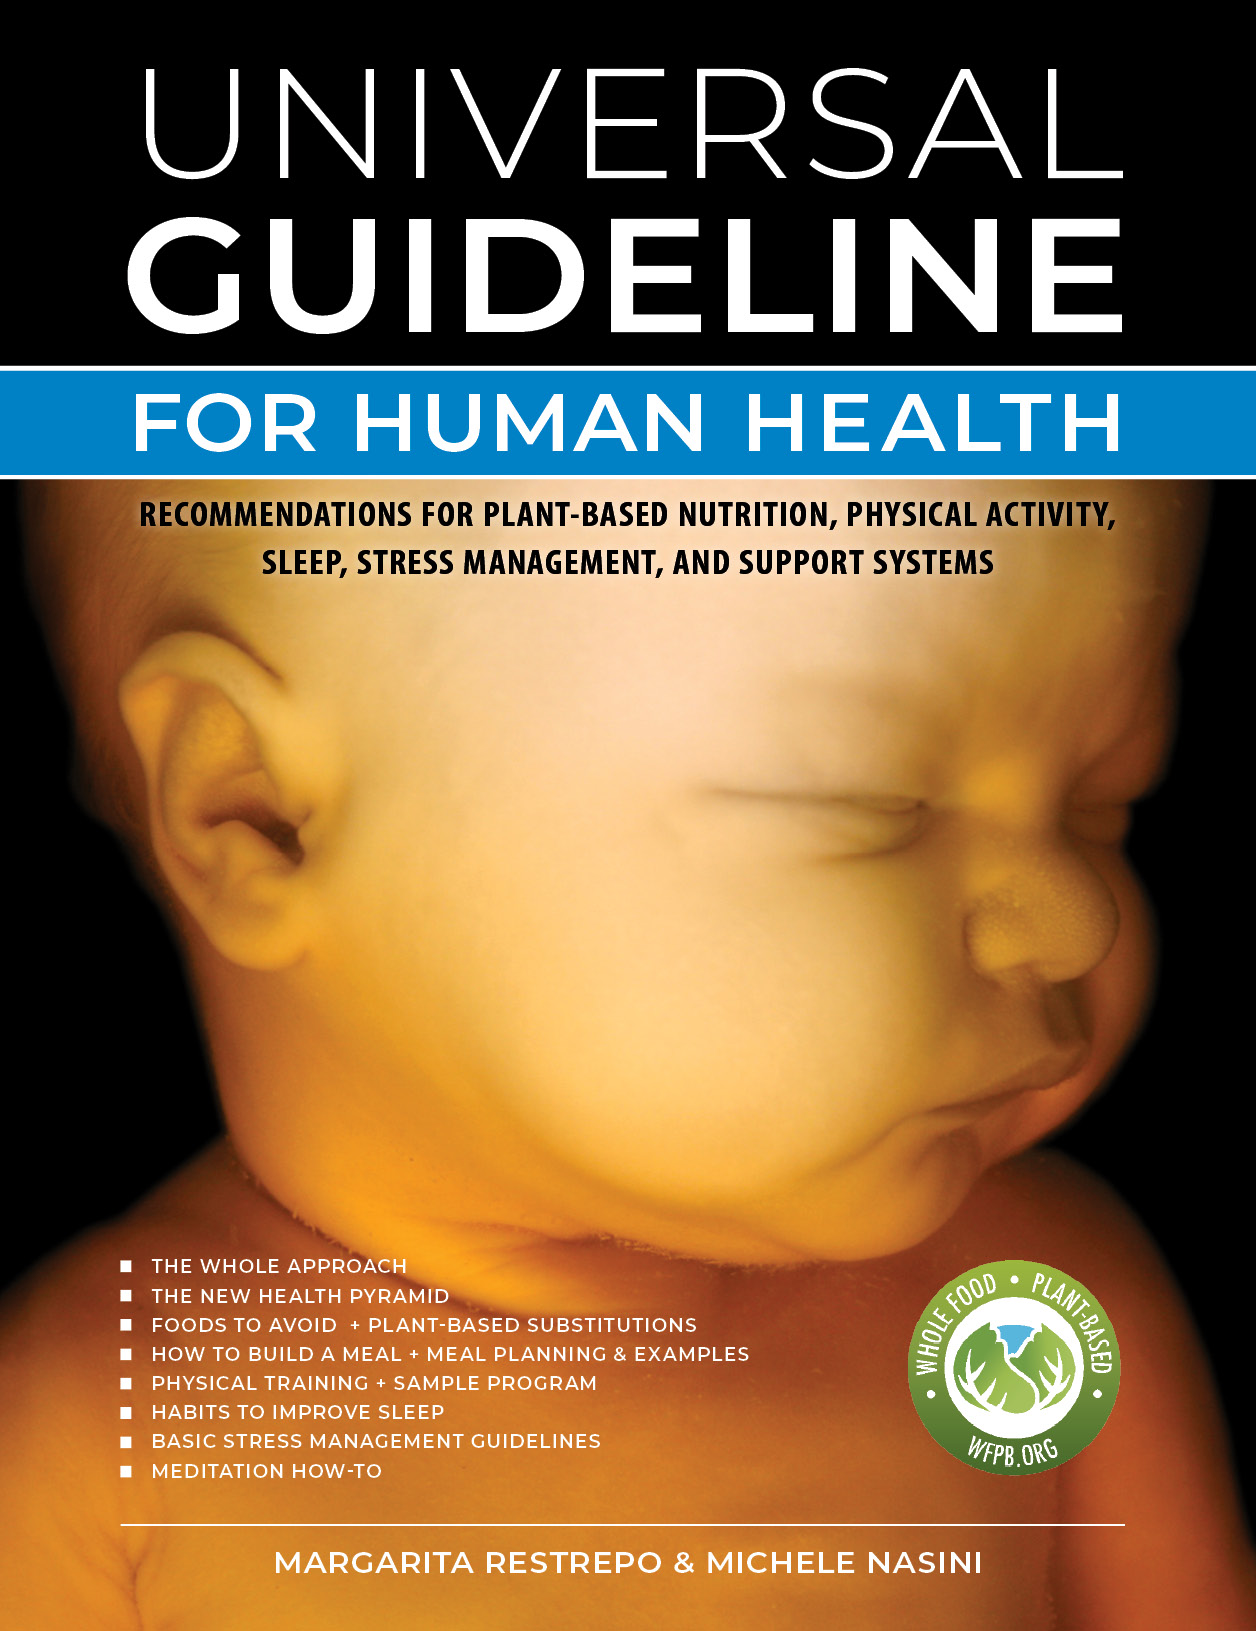 Universal Guideline for Human Health | WFPB.ORG